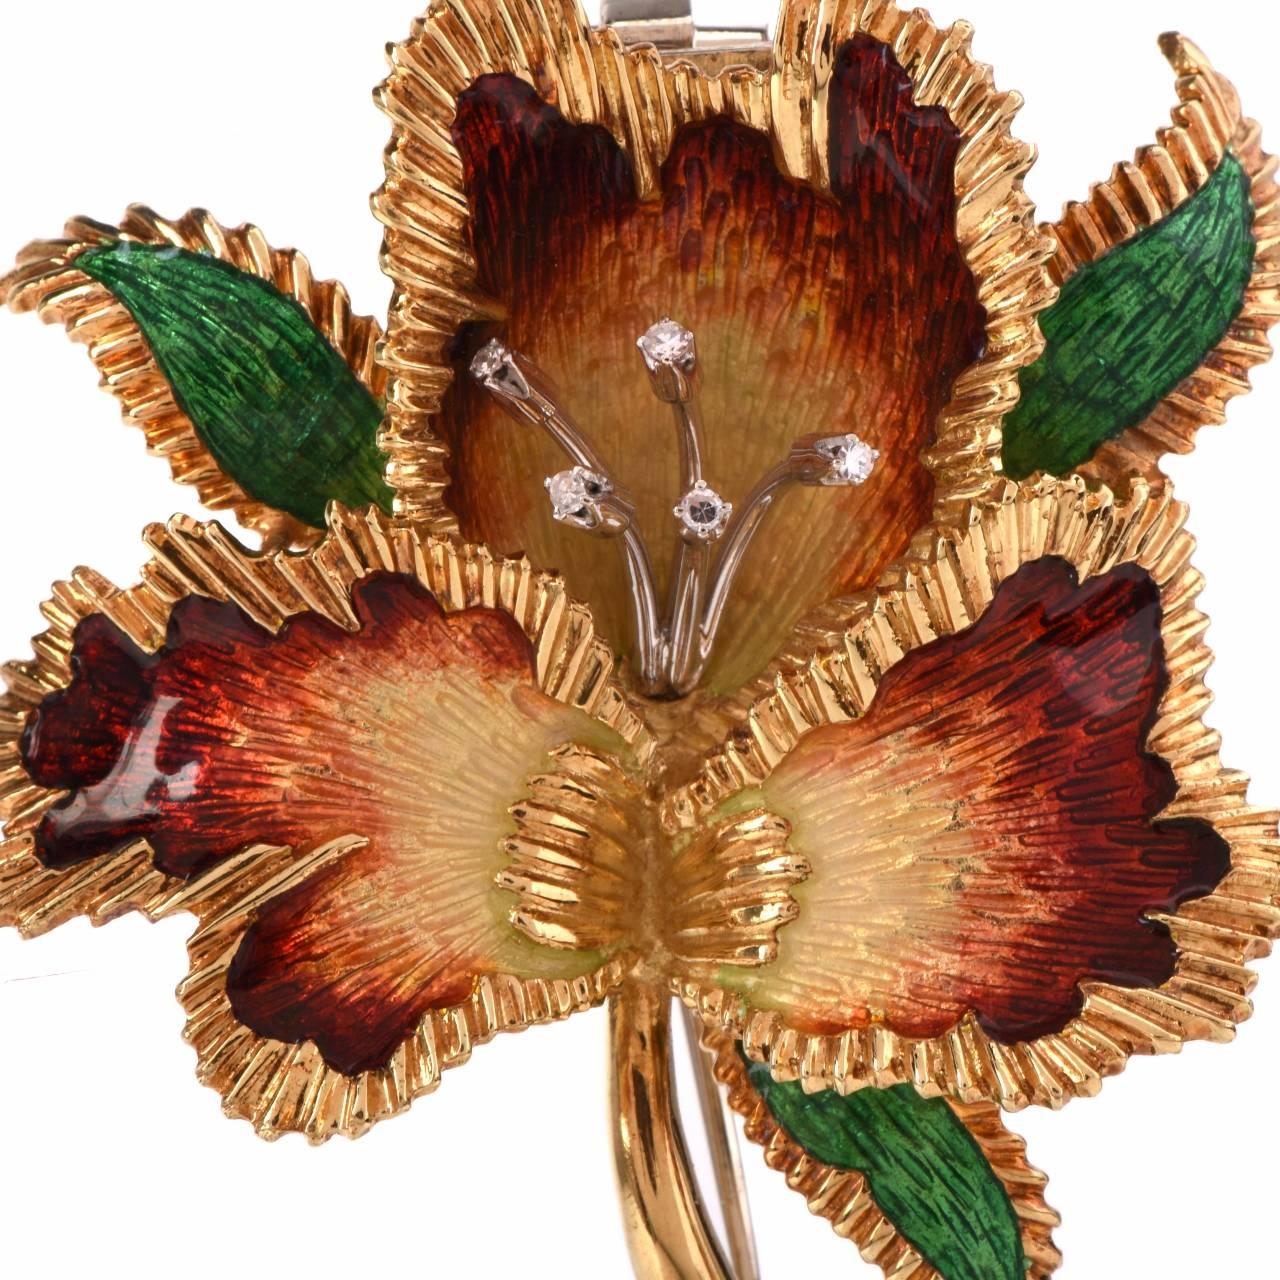 This beautiful vintage floral lapel brooch from the Retro era is of Italian provenance, handcrafted in solid 18K yellow gold, weighing 26.9 grams and measuring 55 mm long x 45 mm wide. Exposing an enchanting three-petal orchid flower with accurate